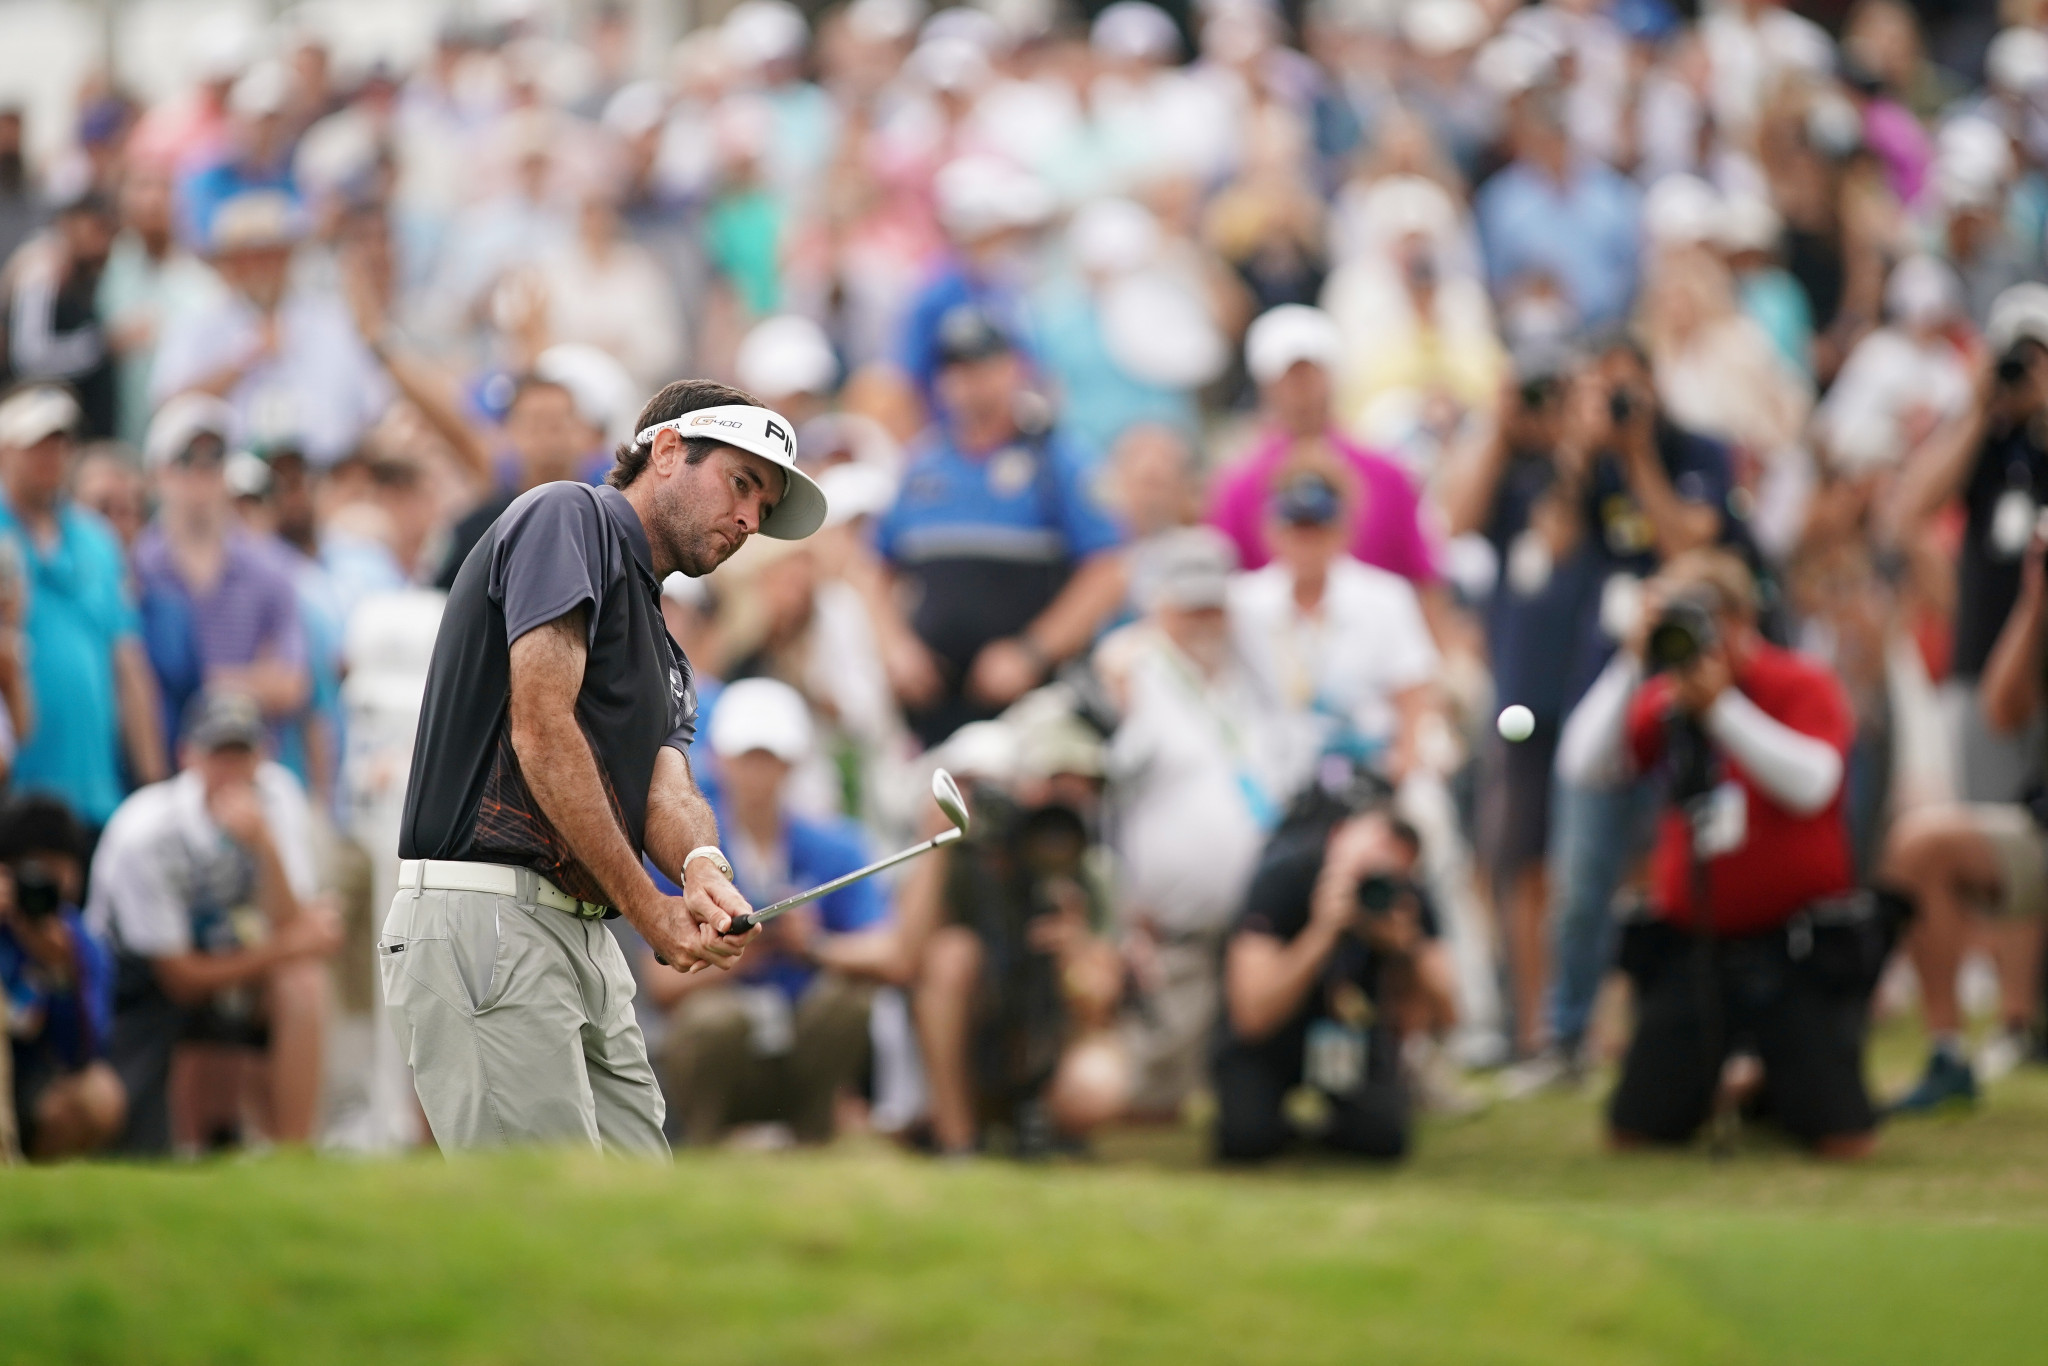 Bubba Watson clinched the WGC Match Play title in Austin ©Getty Images